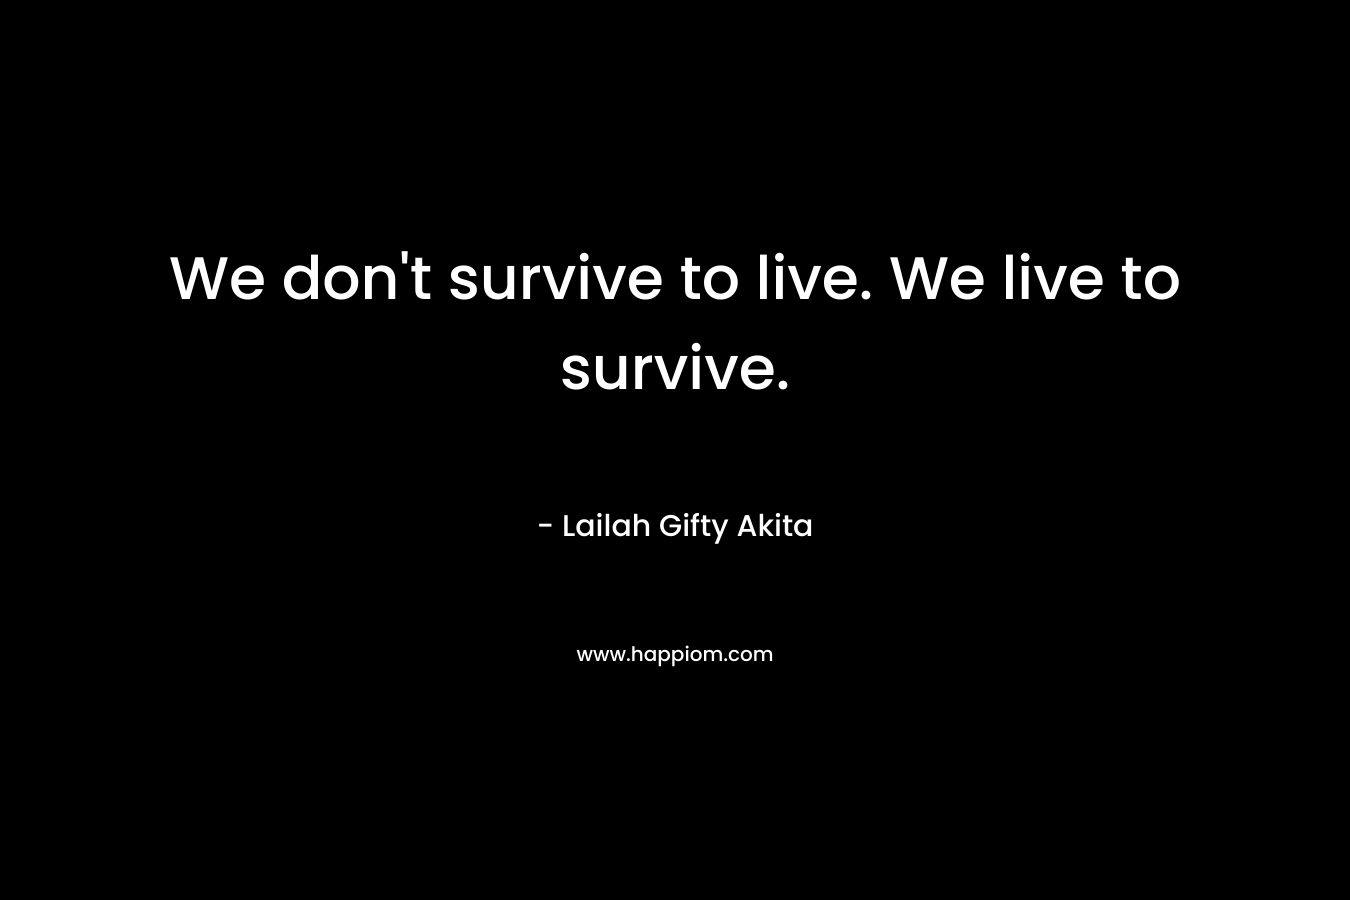 We don't survive to live. We live to survive.